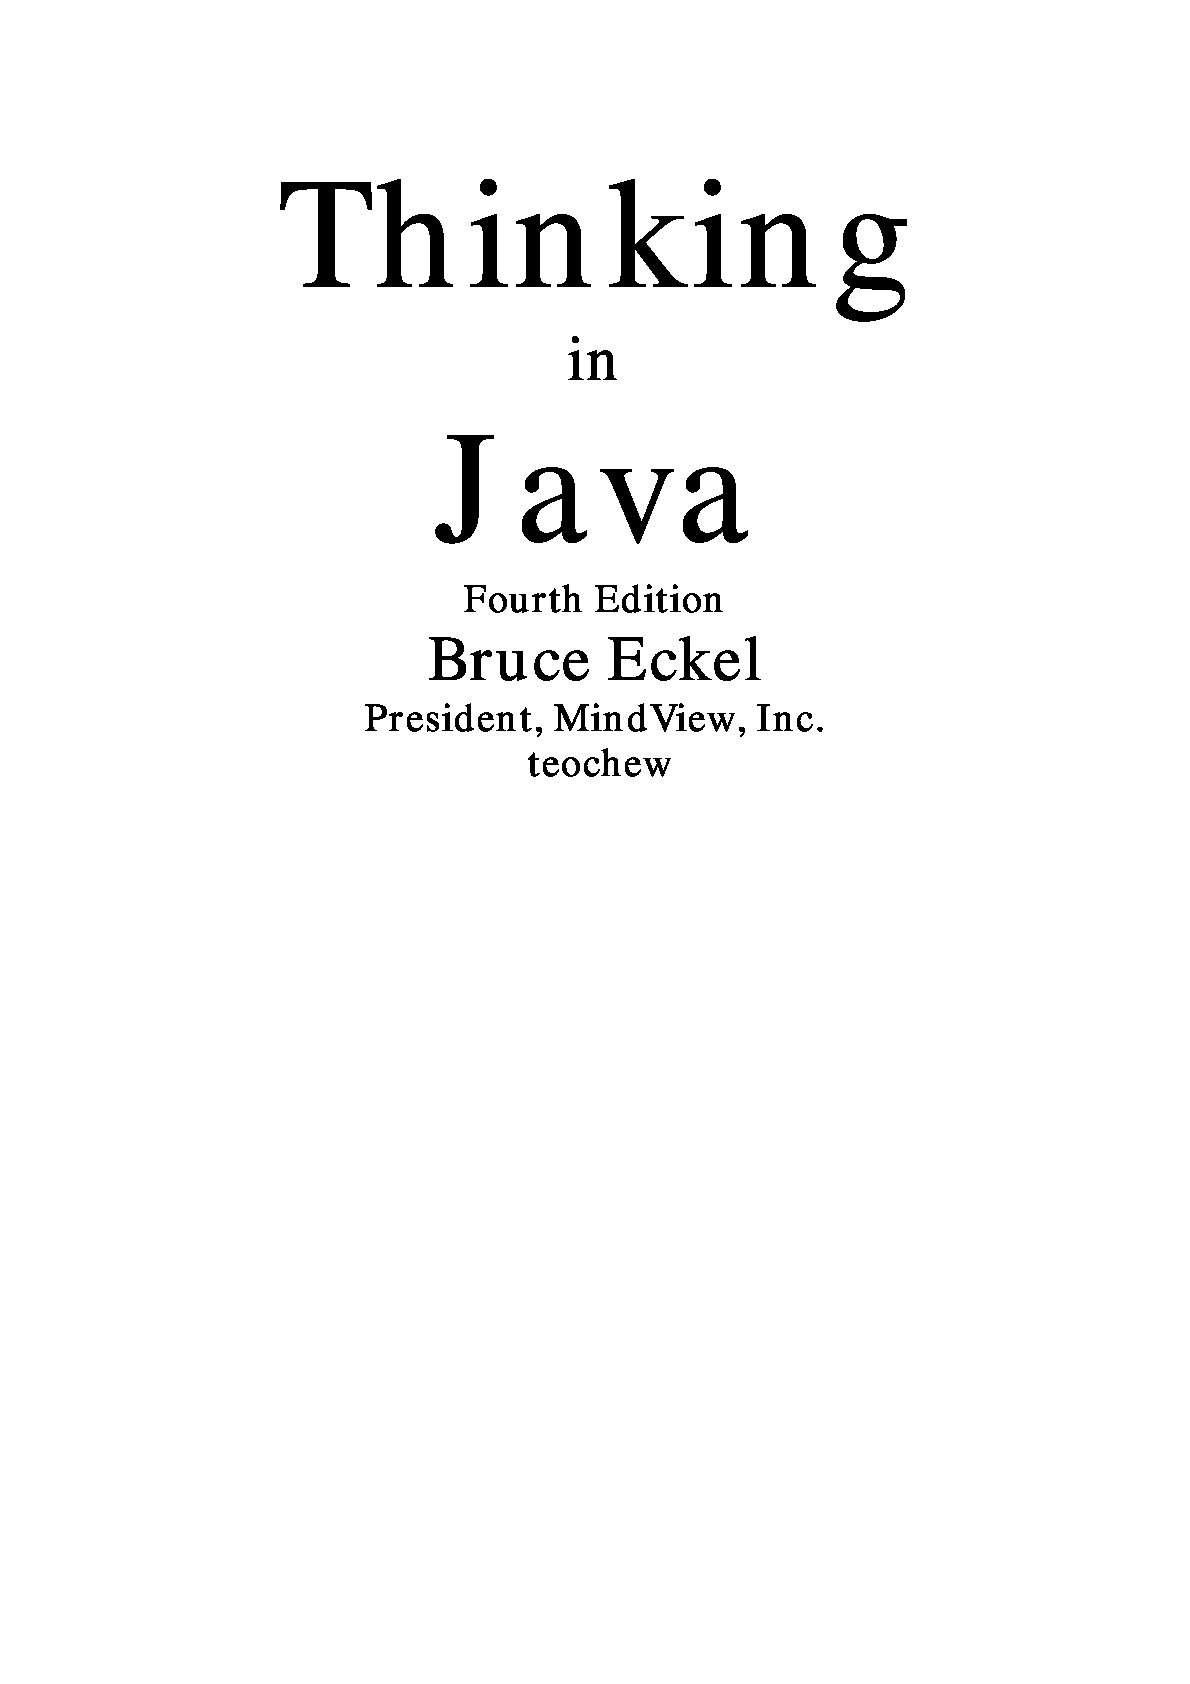 [JAVA][Thinking In Java 4th]